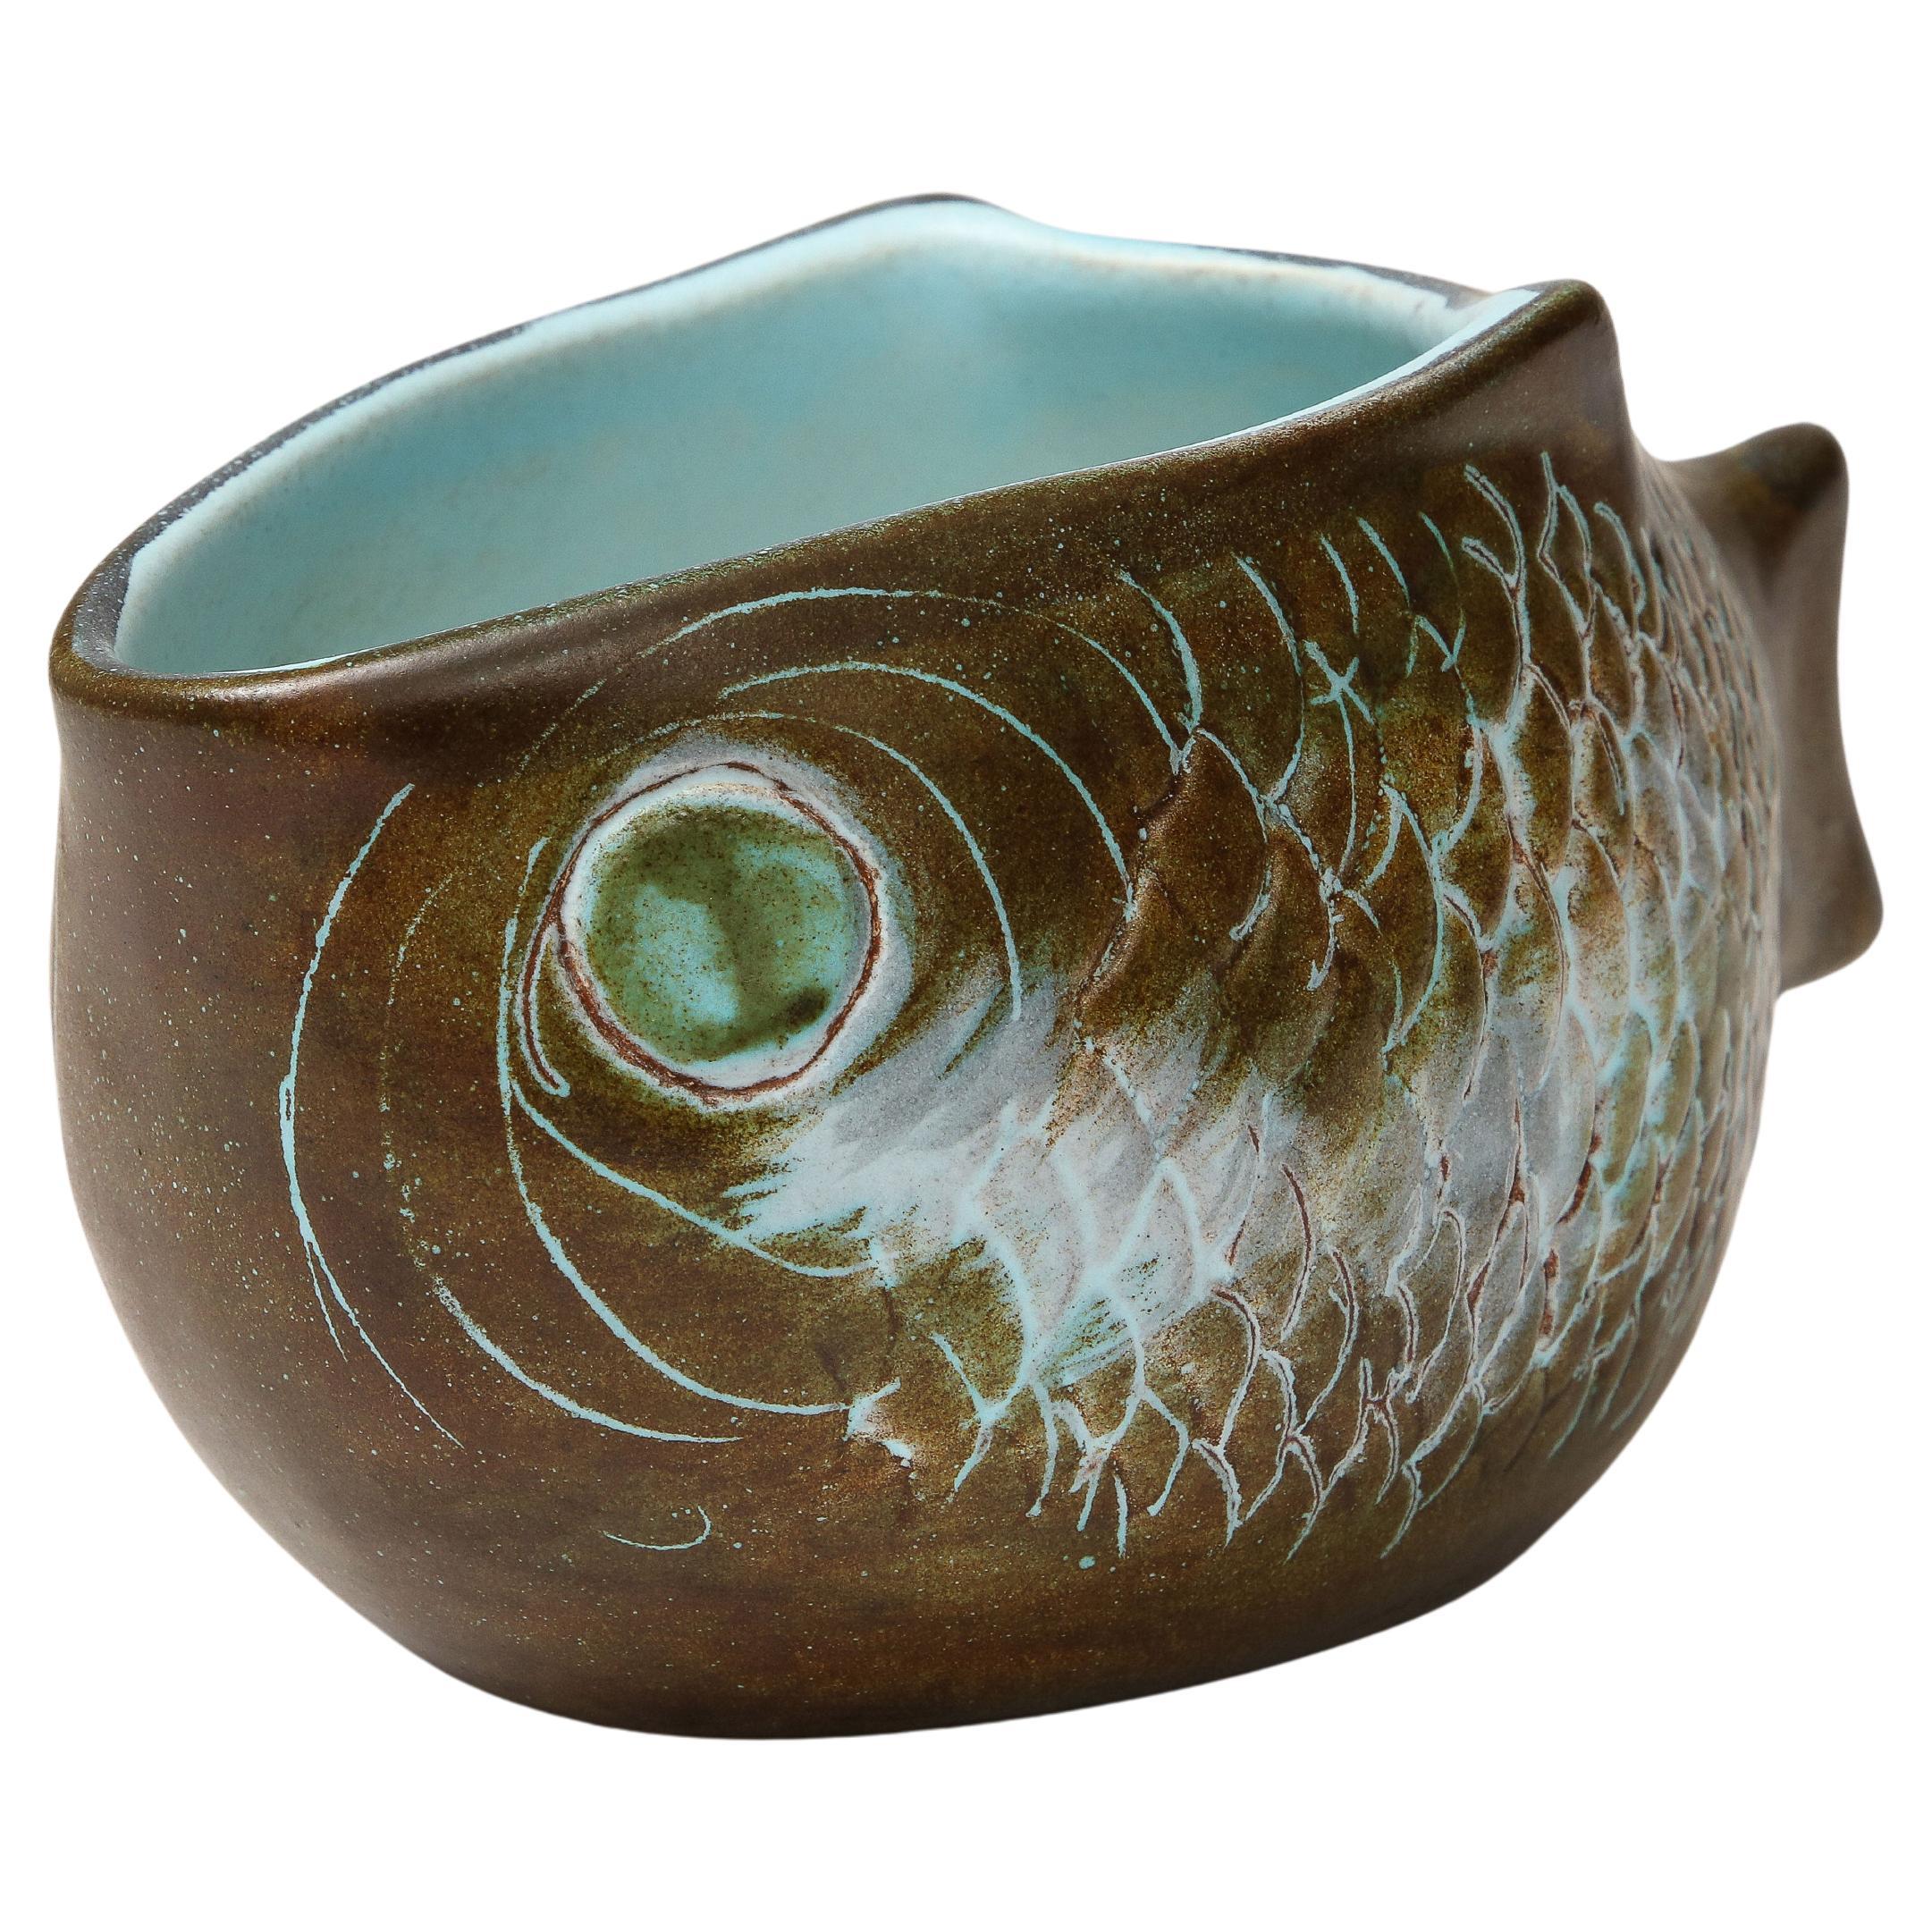 Glazed Ceramic Bowl in the Shape of a Fish, Guillot, c. 1960 For Sale